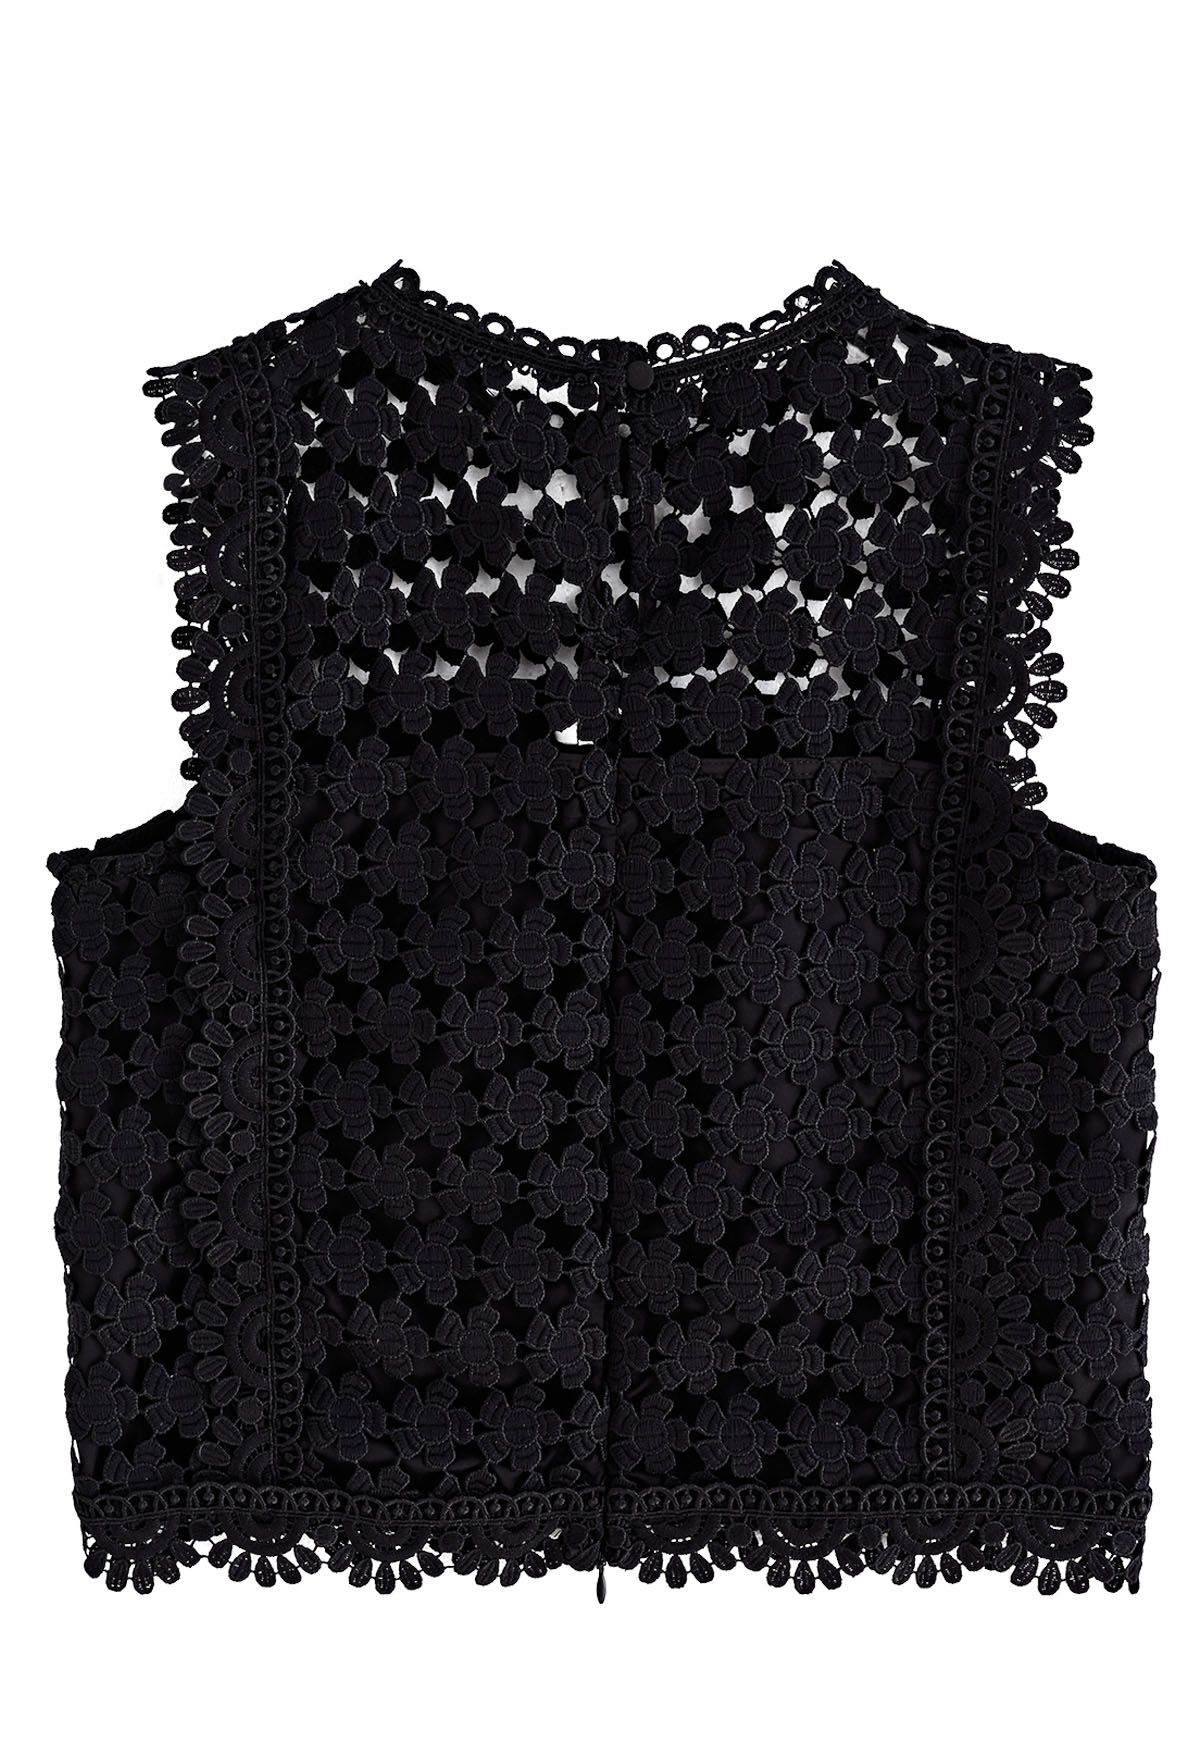 Scalloped Trim Allover Cutwork Lace Sleeveless Top in Black